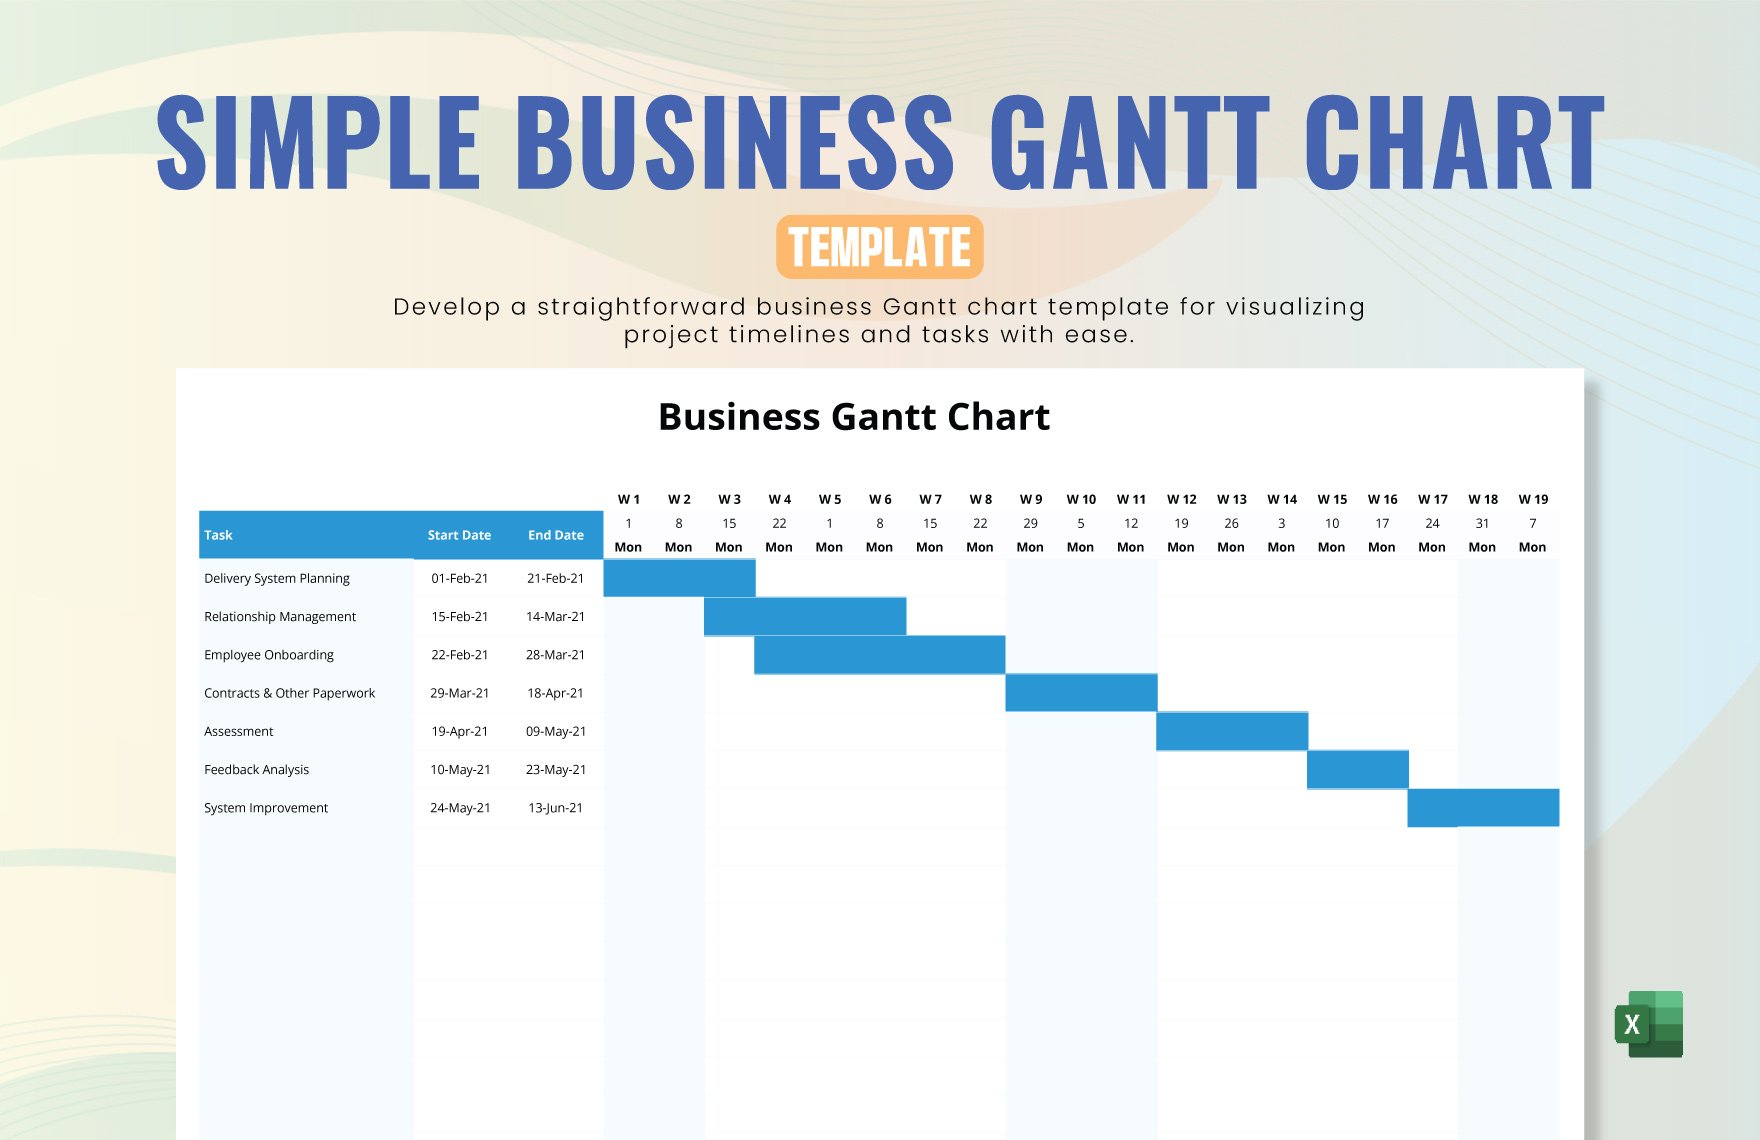 Simple Business Gantt Chart Template in Excel